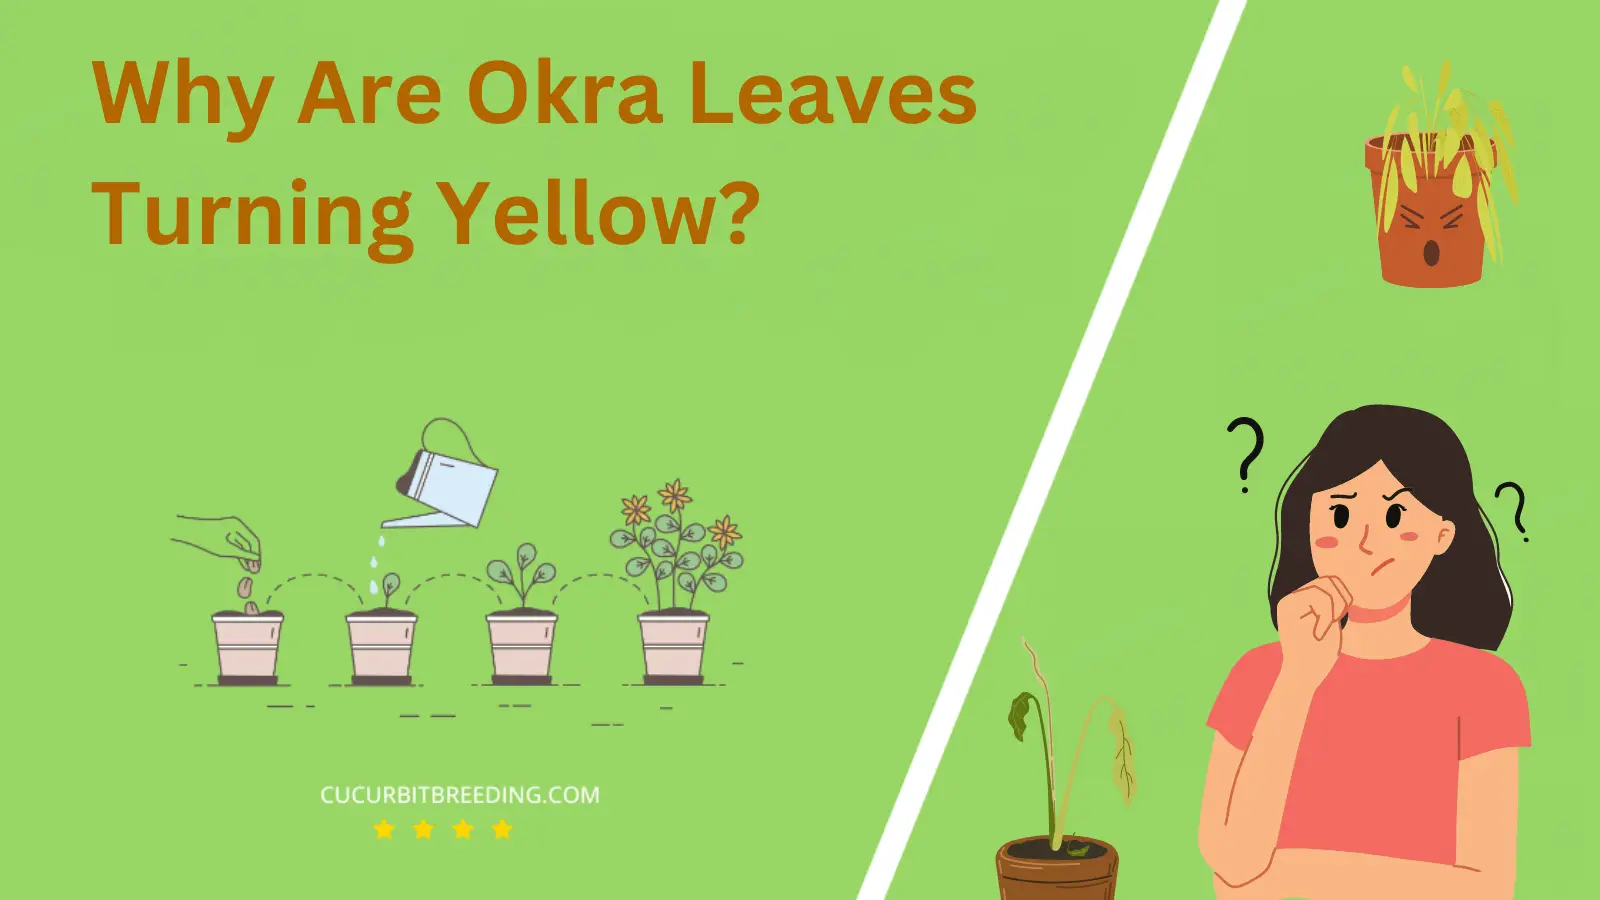 Why Are Okra Leaves Turning Yellow